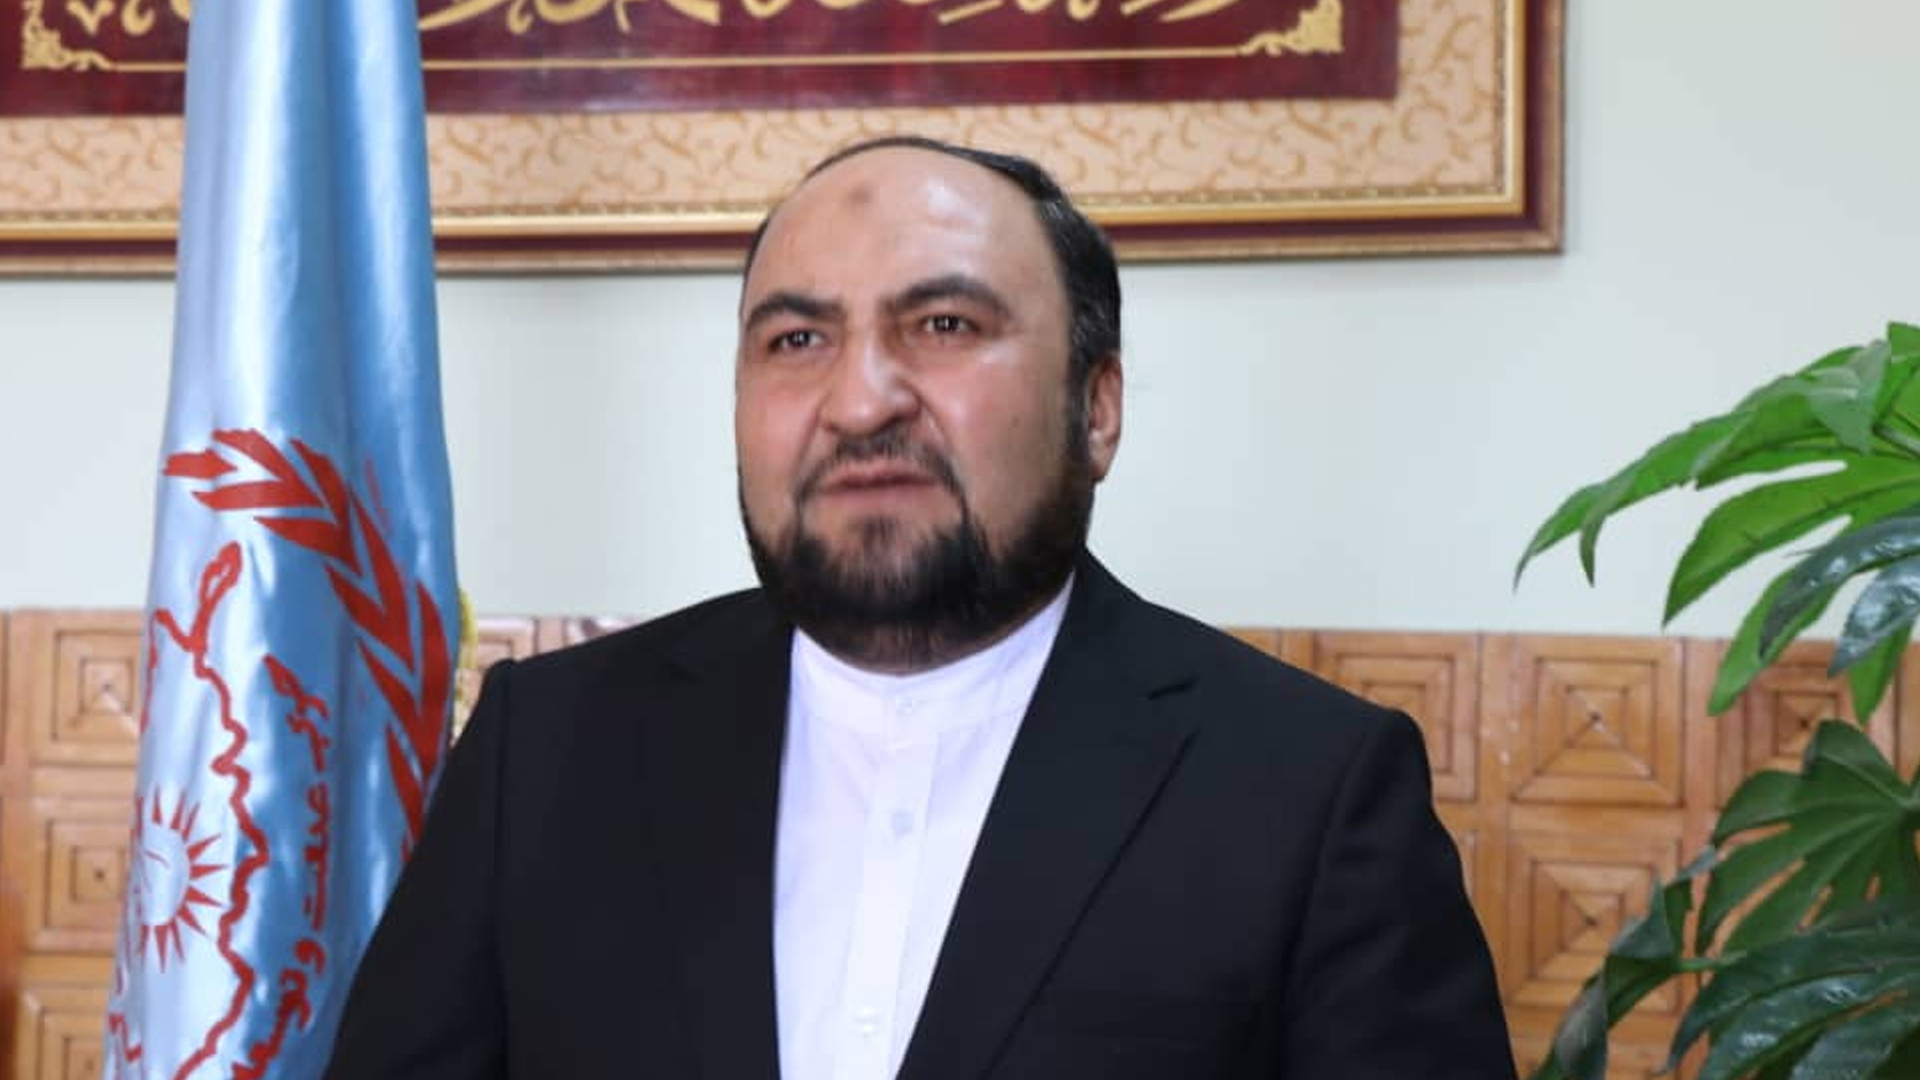  Hosseini, Leader of Development Party, Arrested in Kabul by Taliban